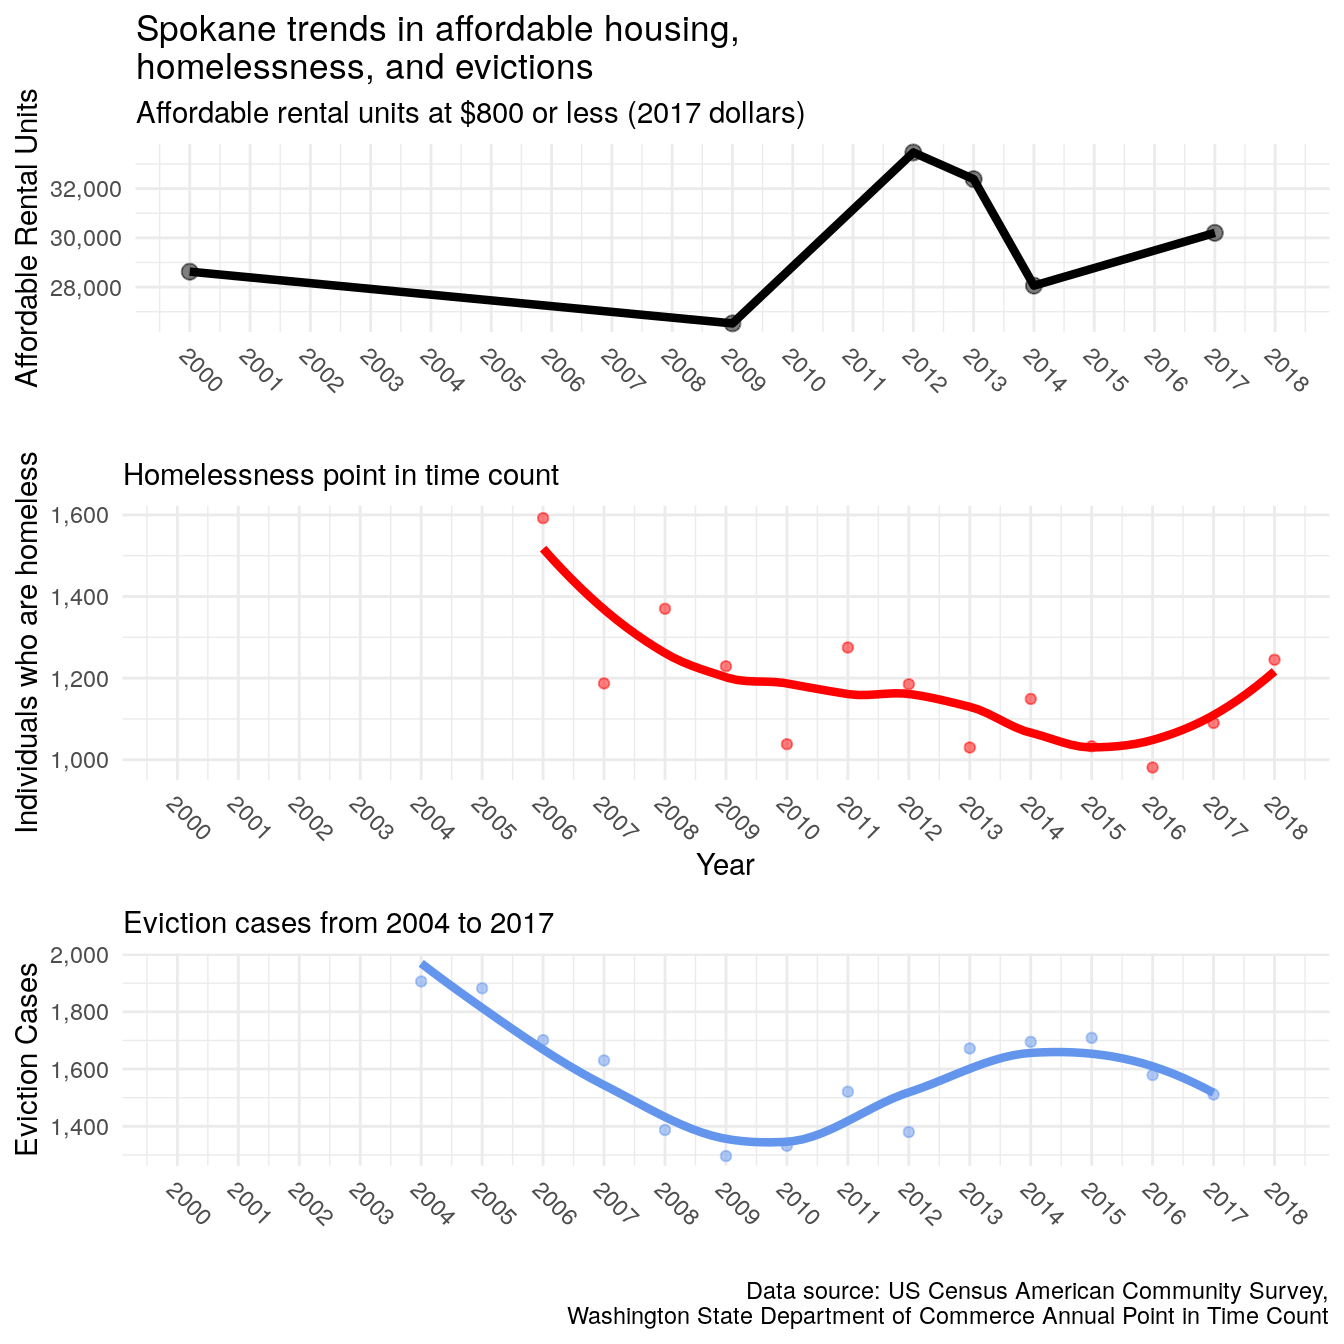 Trends in affordable housing, homelessness, and evictions in four other counties